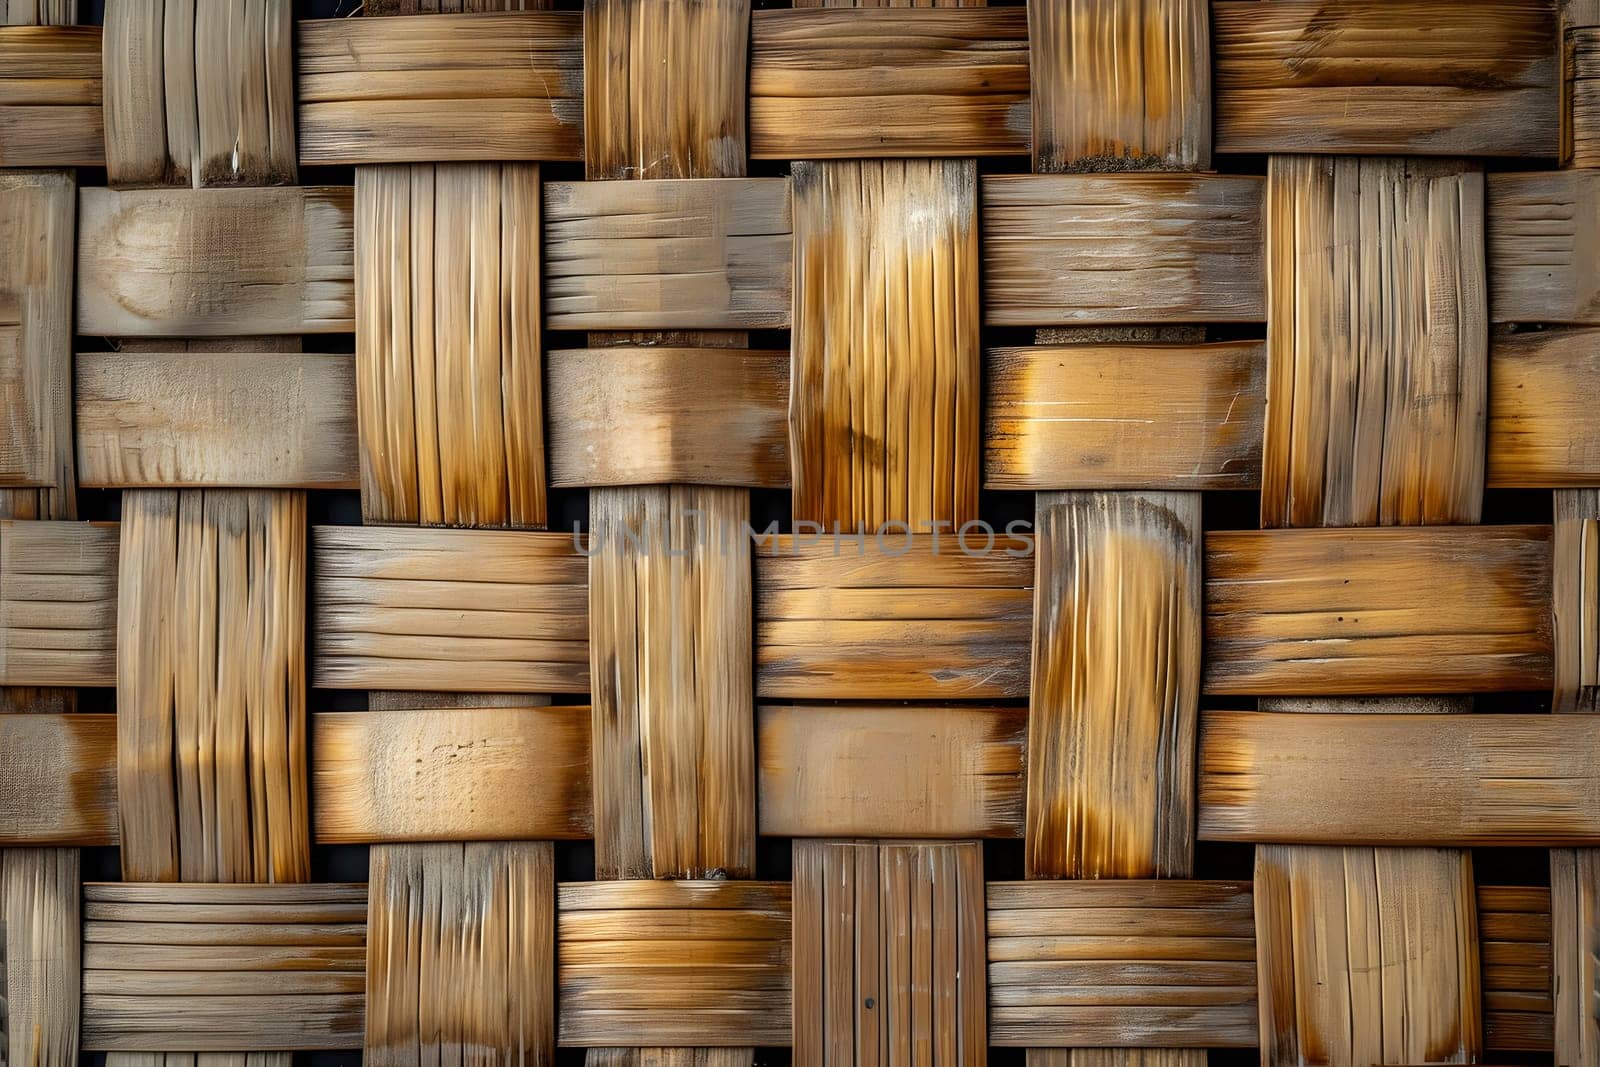 Flat full-frame seamless texture of wicker bamboo wall. Neural network generated image. Not based on any actual scene or pattern.